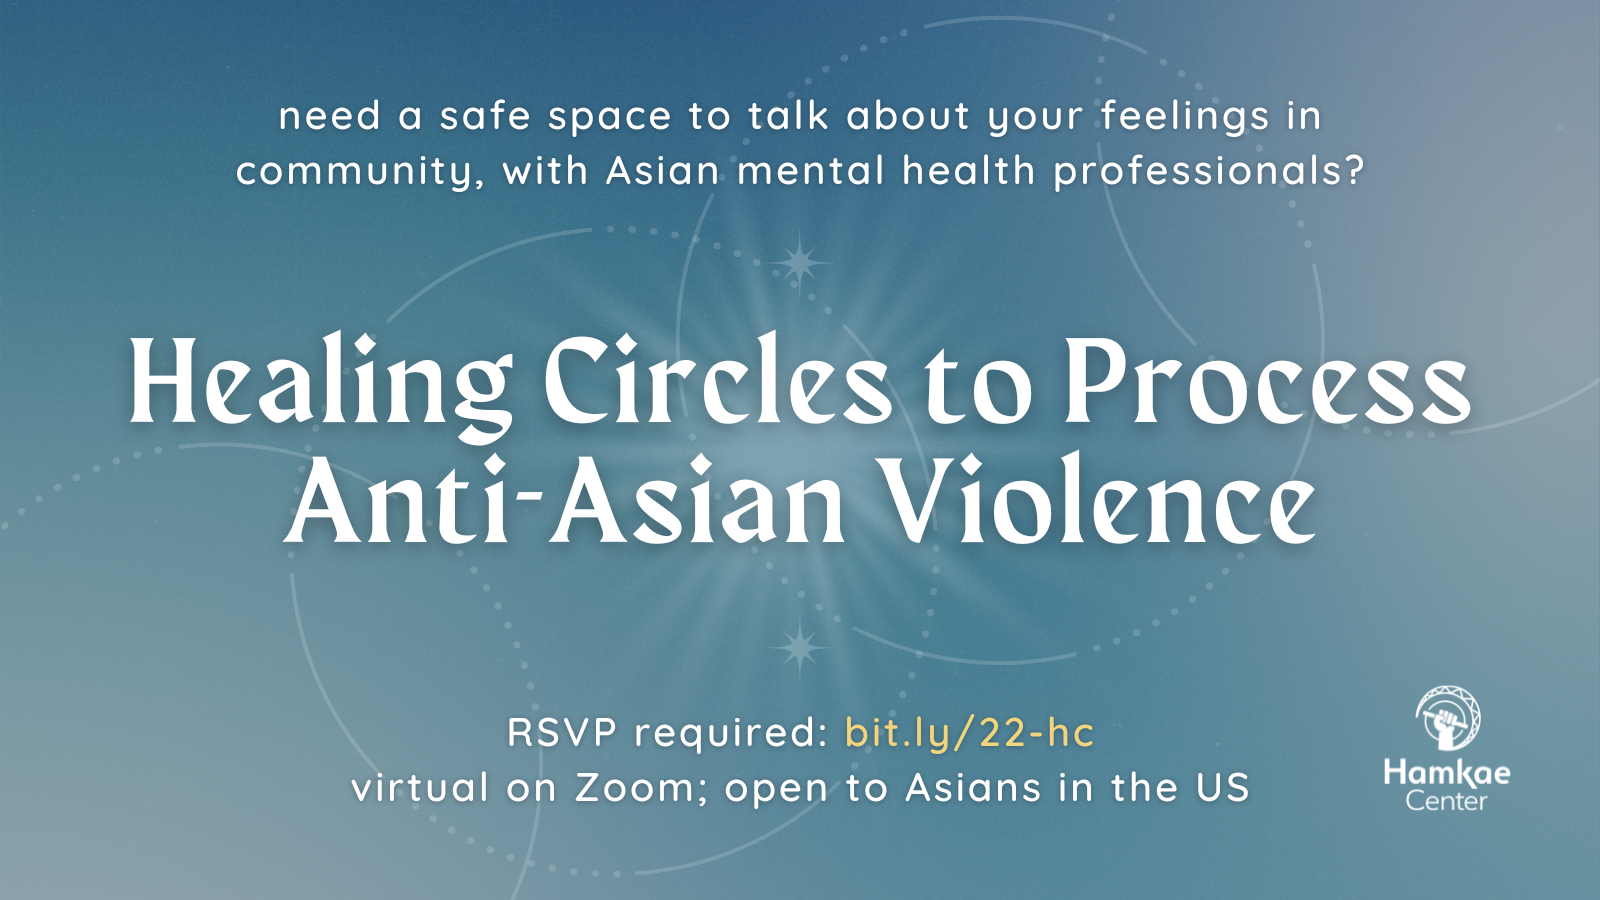 Need a safe space to talk about your feelings in community, with Asian mental health professionals? Healing Circles to Process Anti-Asian Violence RSVP required: bit.ly/22-hc virtual on Zoom; open to Asians in the US hosted by Hamkae Center